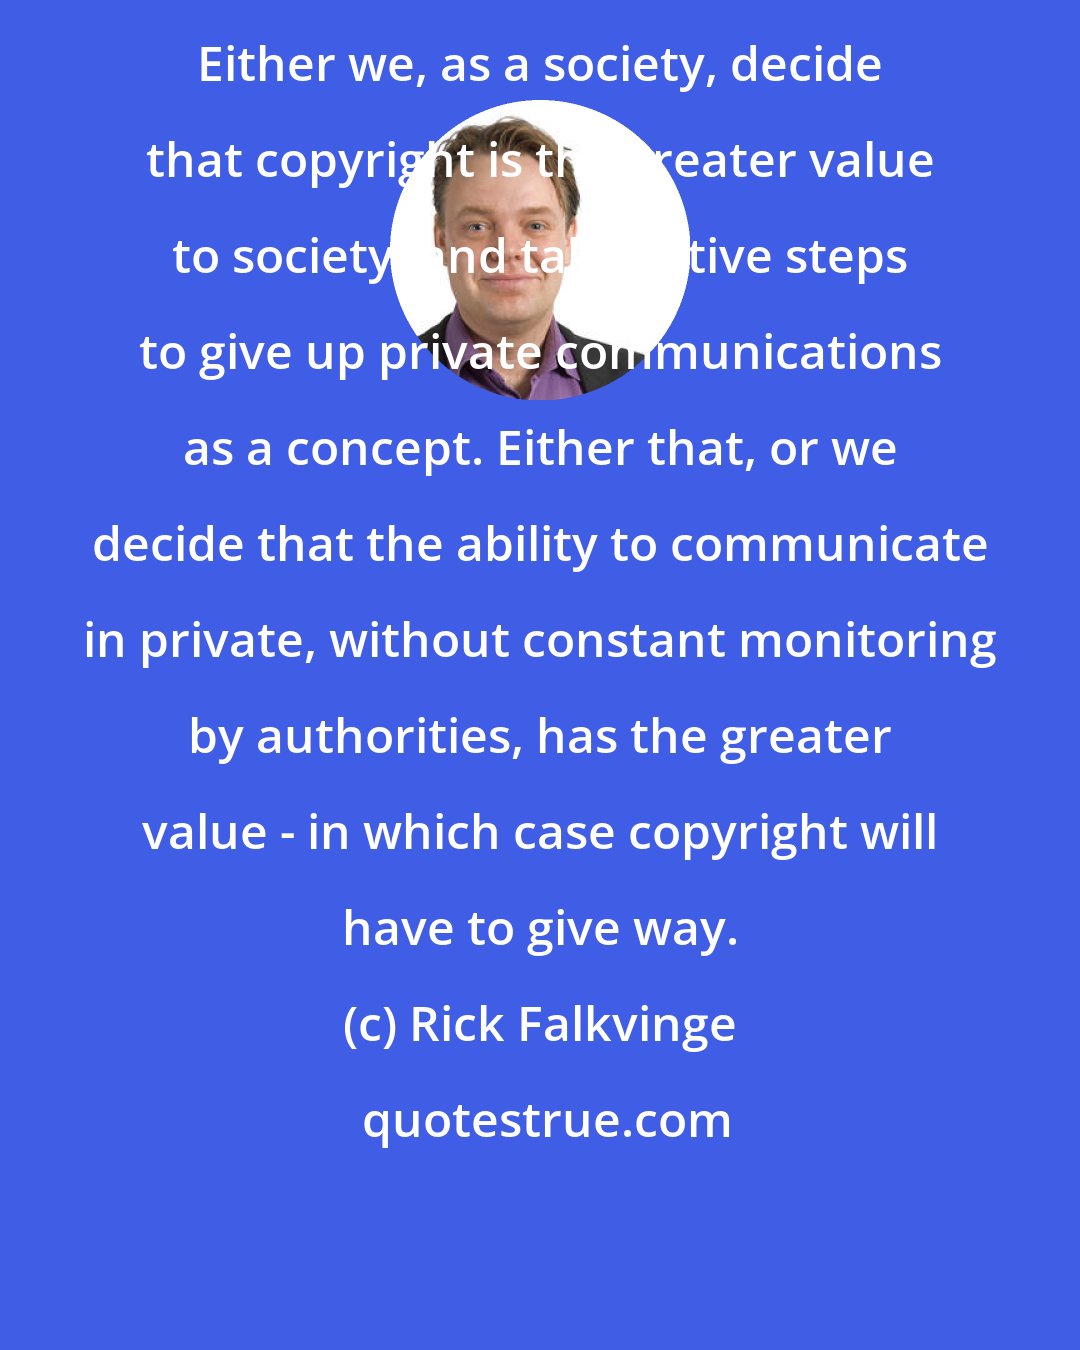 Rick Falkvinge: Either we, as a society, decide that copyright is the greater value to society, and take active steps to give up private communications as a concept. Either that, or we decide that the ability to communicate in private, without constant monitoring by authorities, has the greater value - in which case copyright will have to give way.